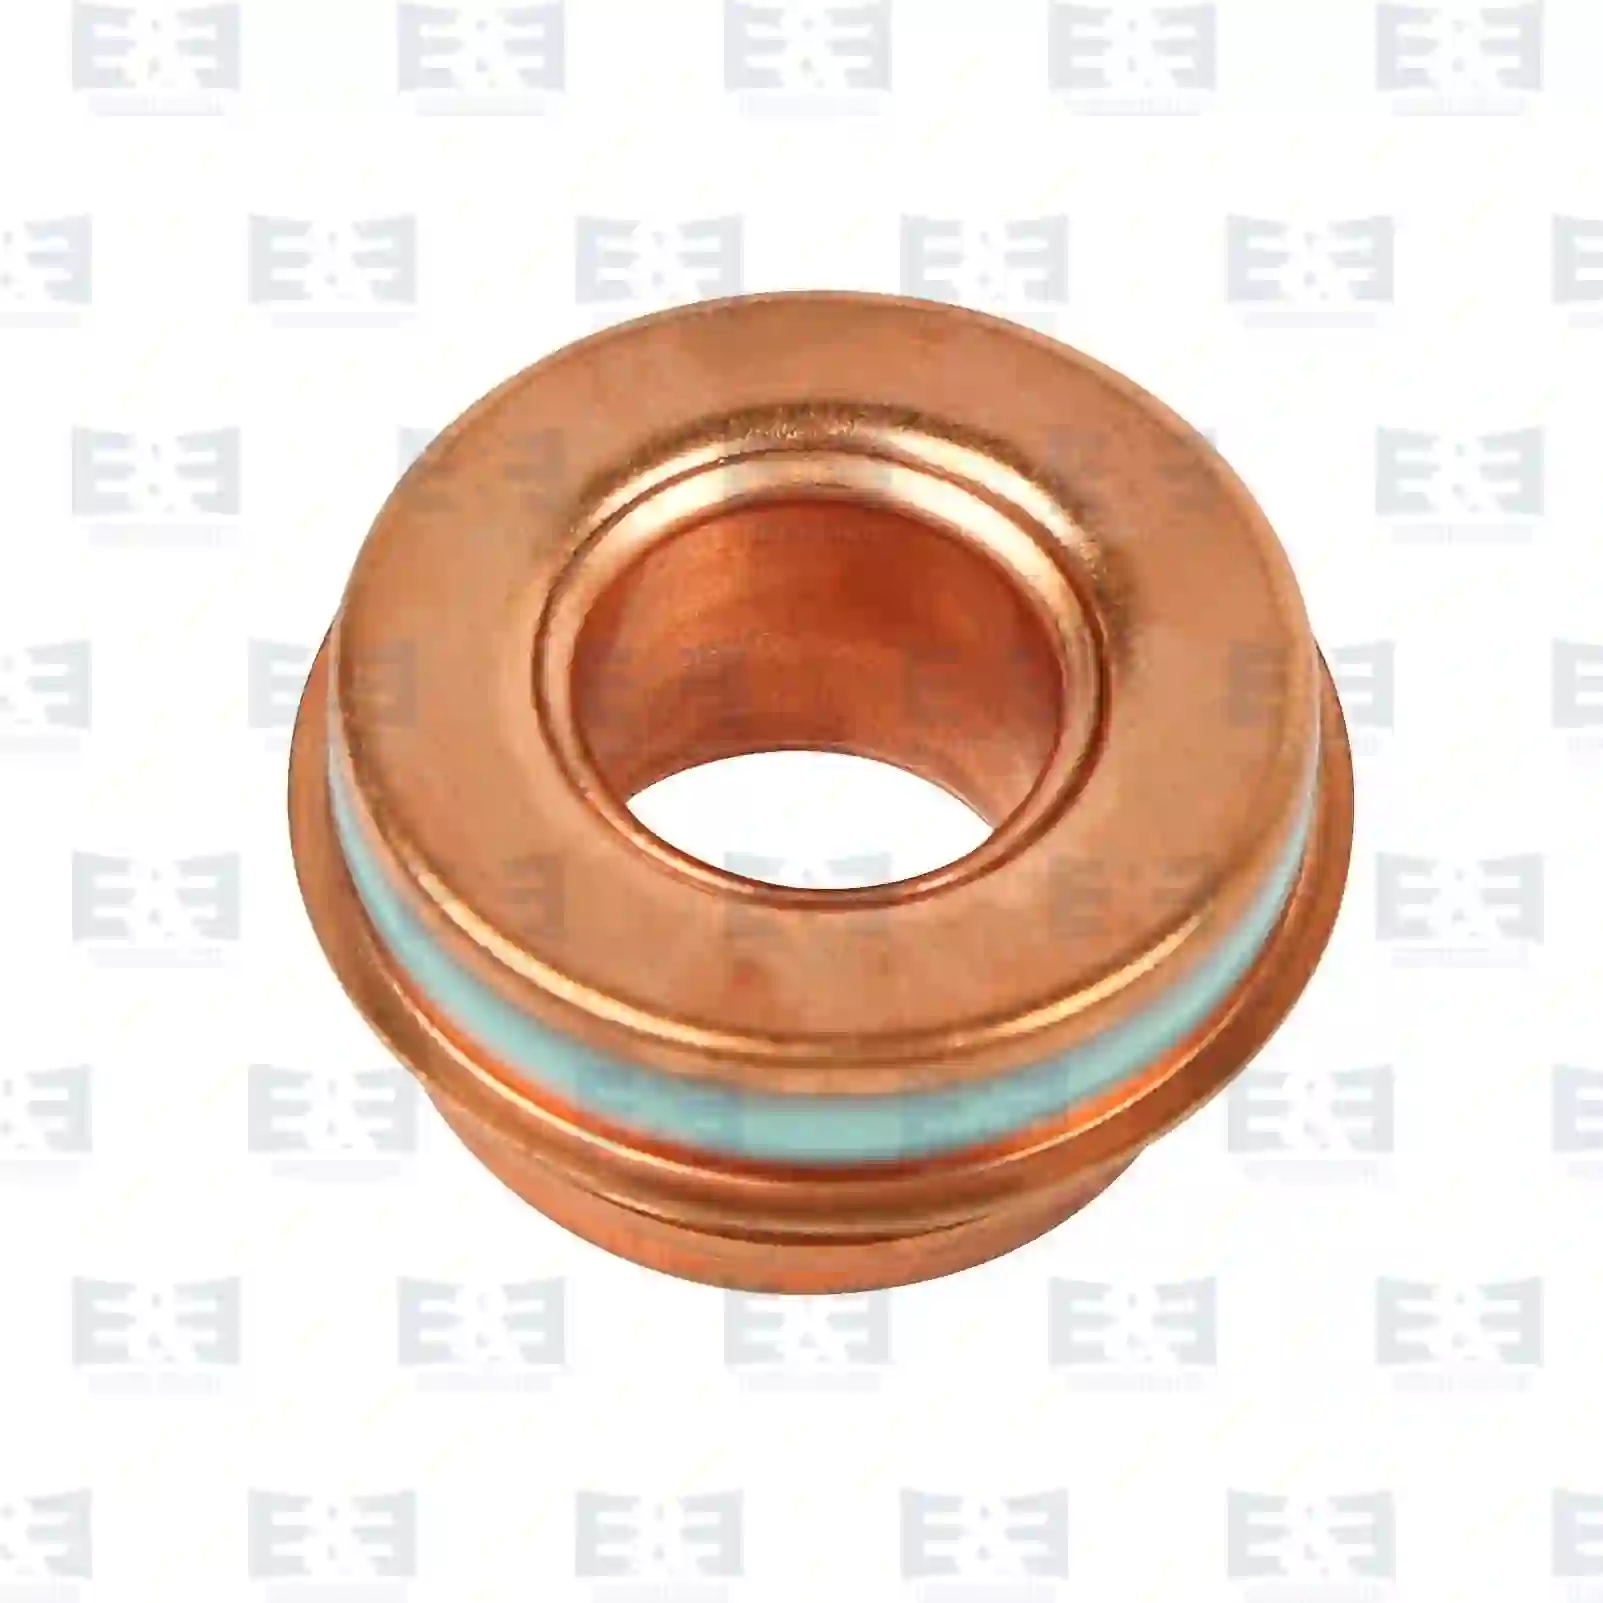  Slide ring seal || E&E Truck Spare Parts | Truck Spare Parts, Auotomotive Spare Parts